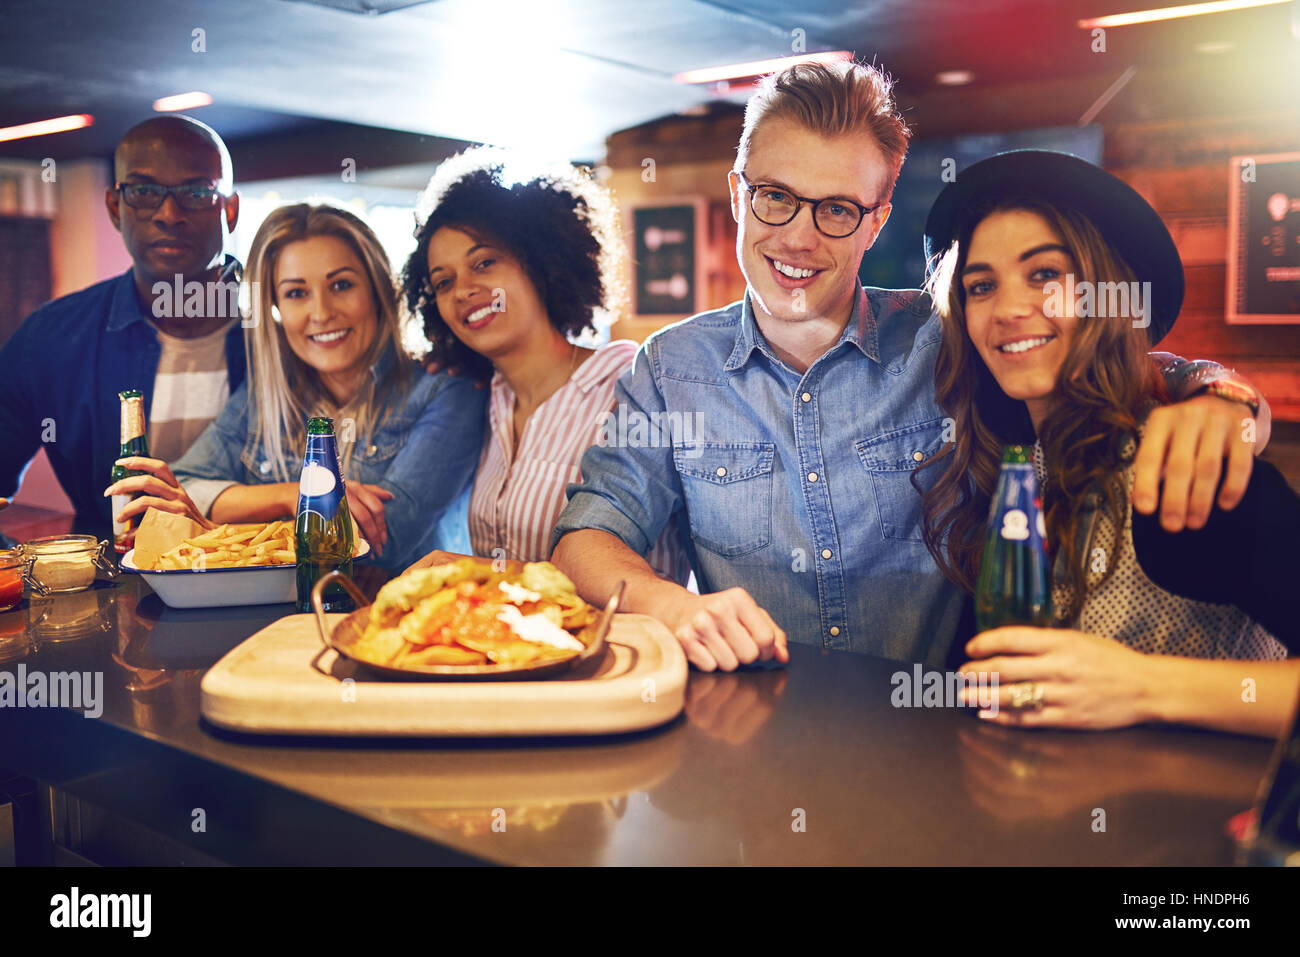 Cheerful friendly people posing at the bar counter with beer and snacks. Horizontal indoors shot. Stock Photo